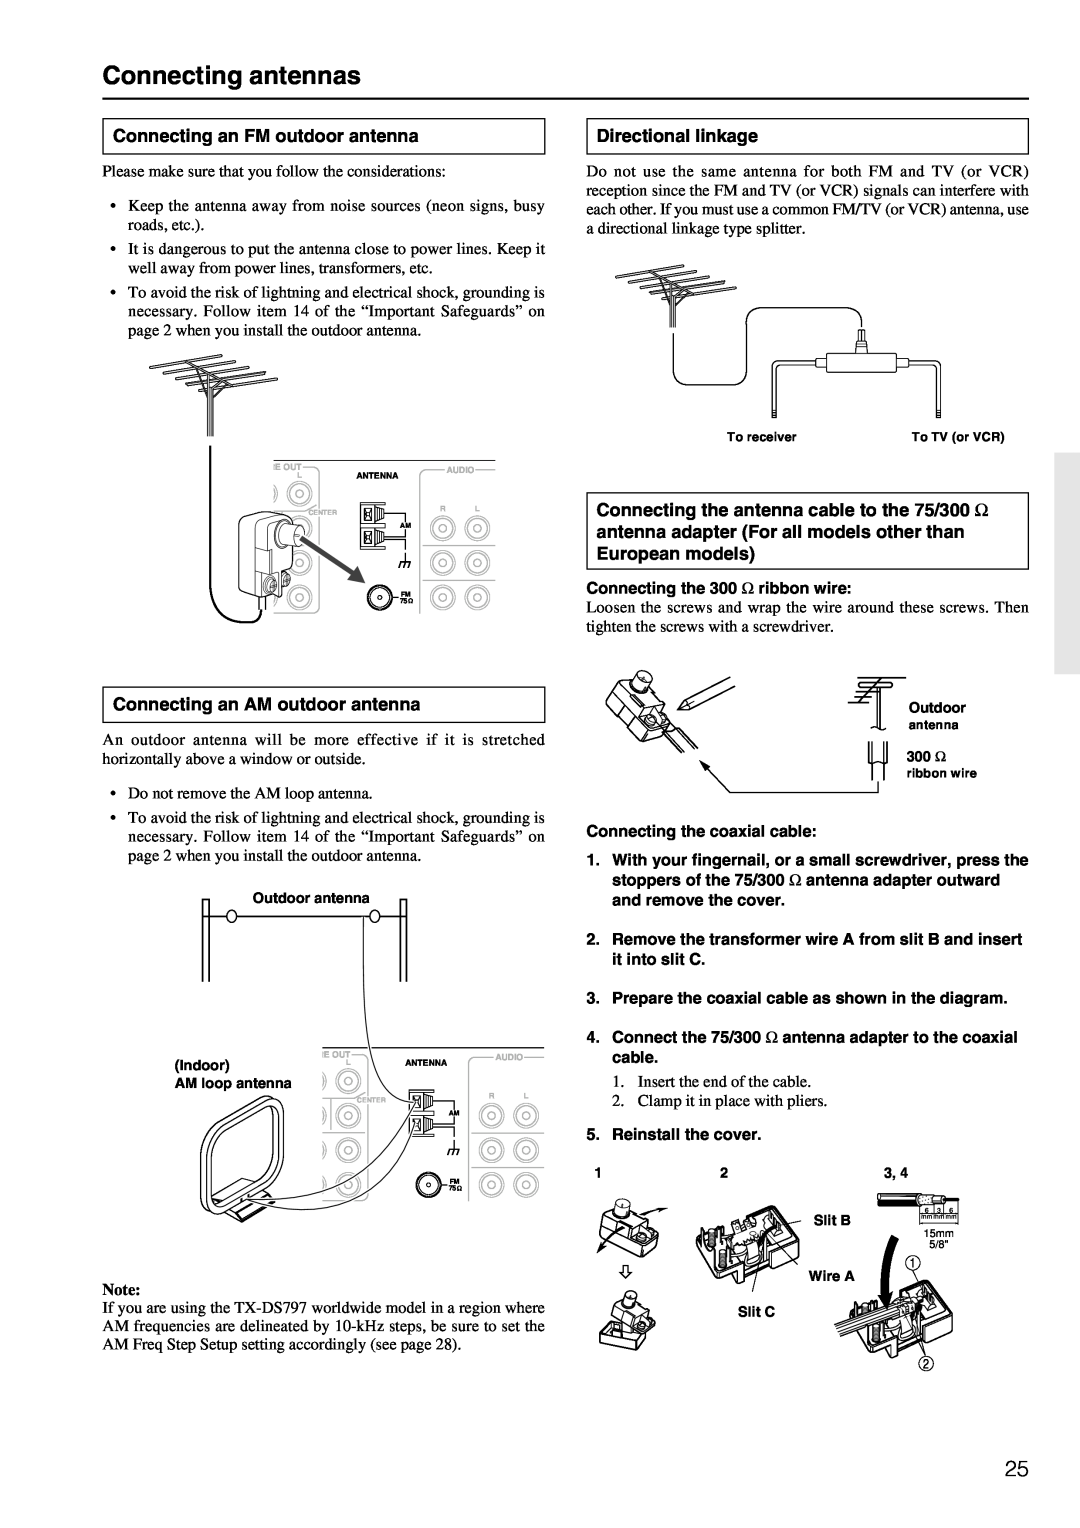 Onkyo TX-DS797 instruction manual Connecting antennas, Connecting an FM outdoor antenna, Directional linkage 